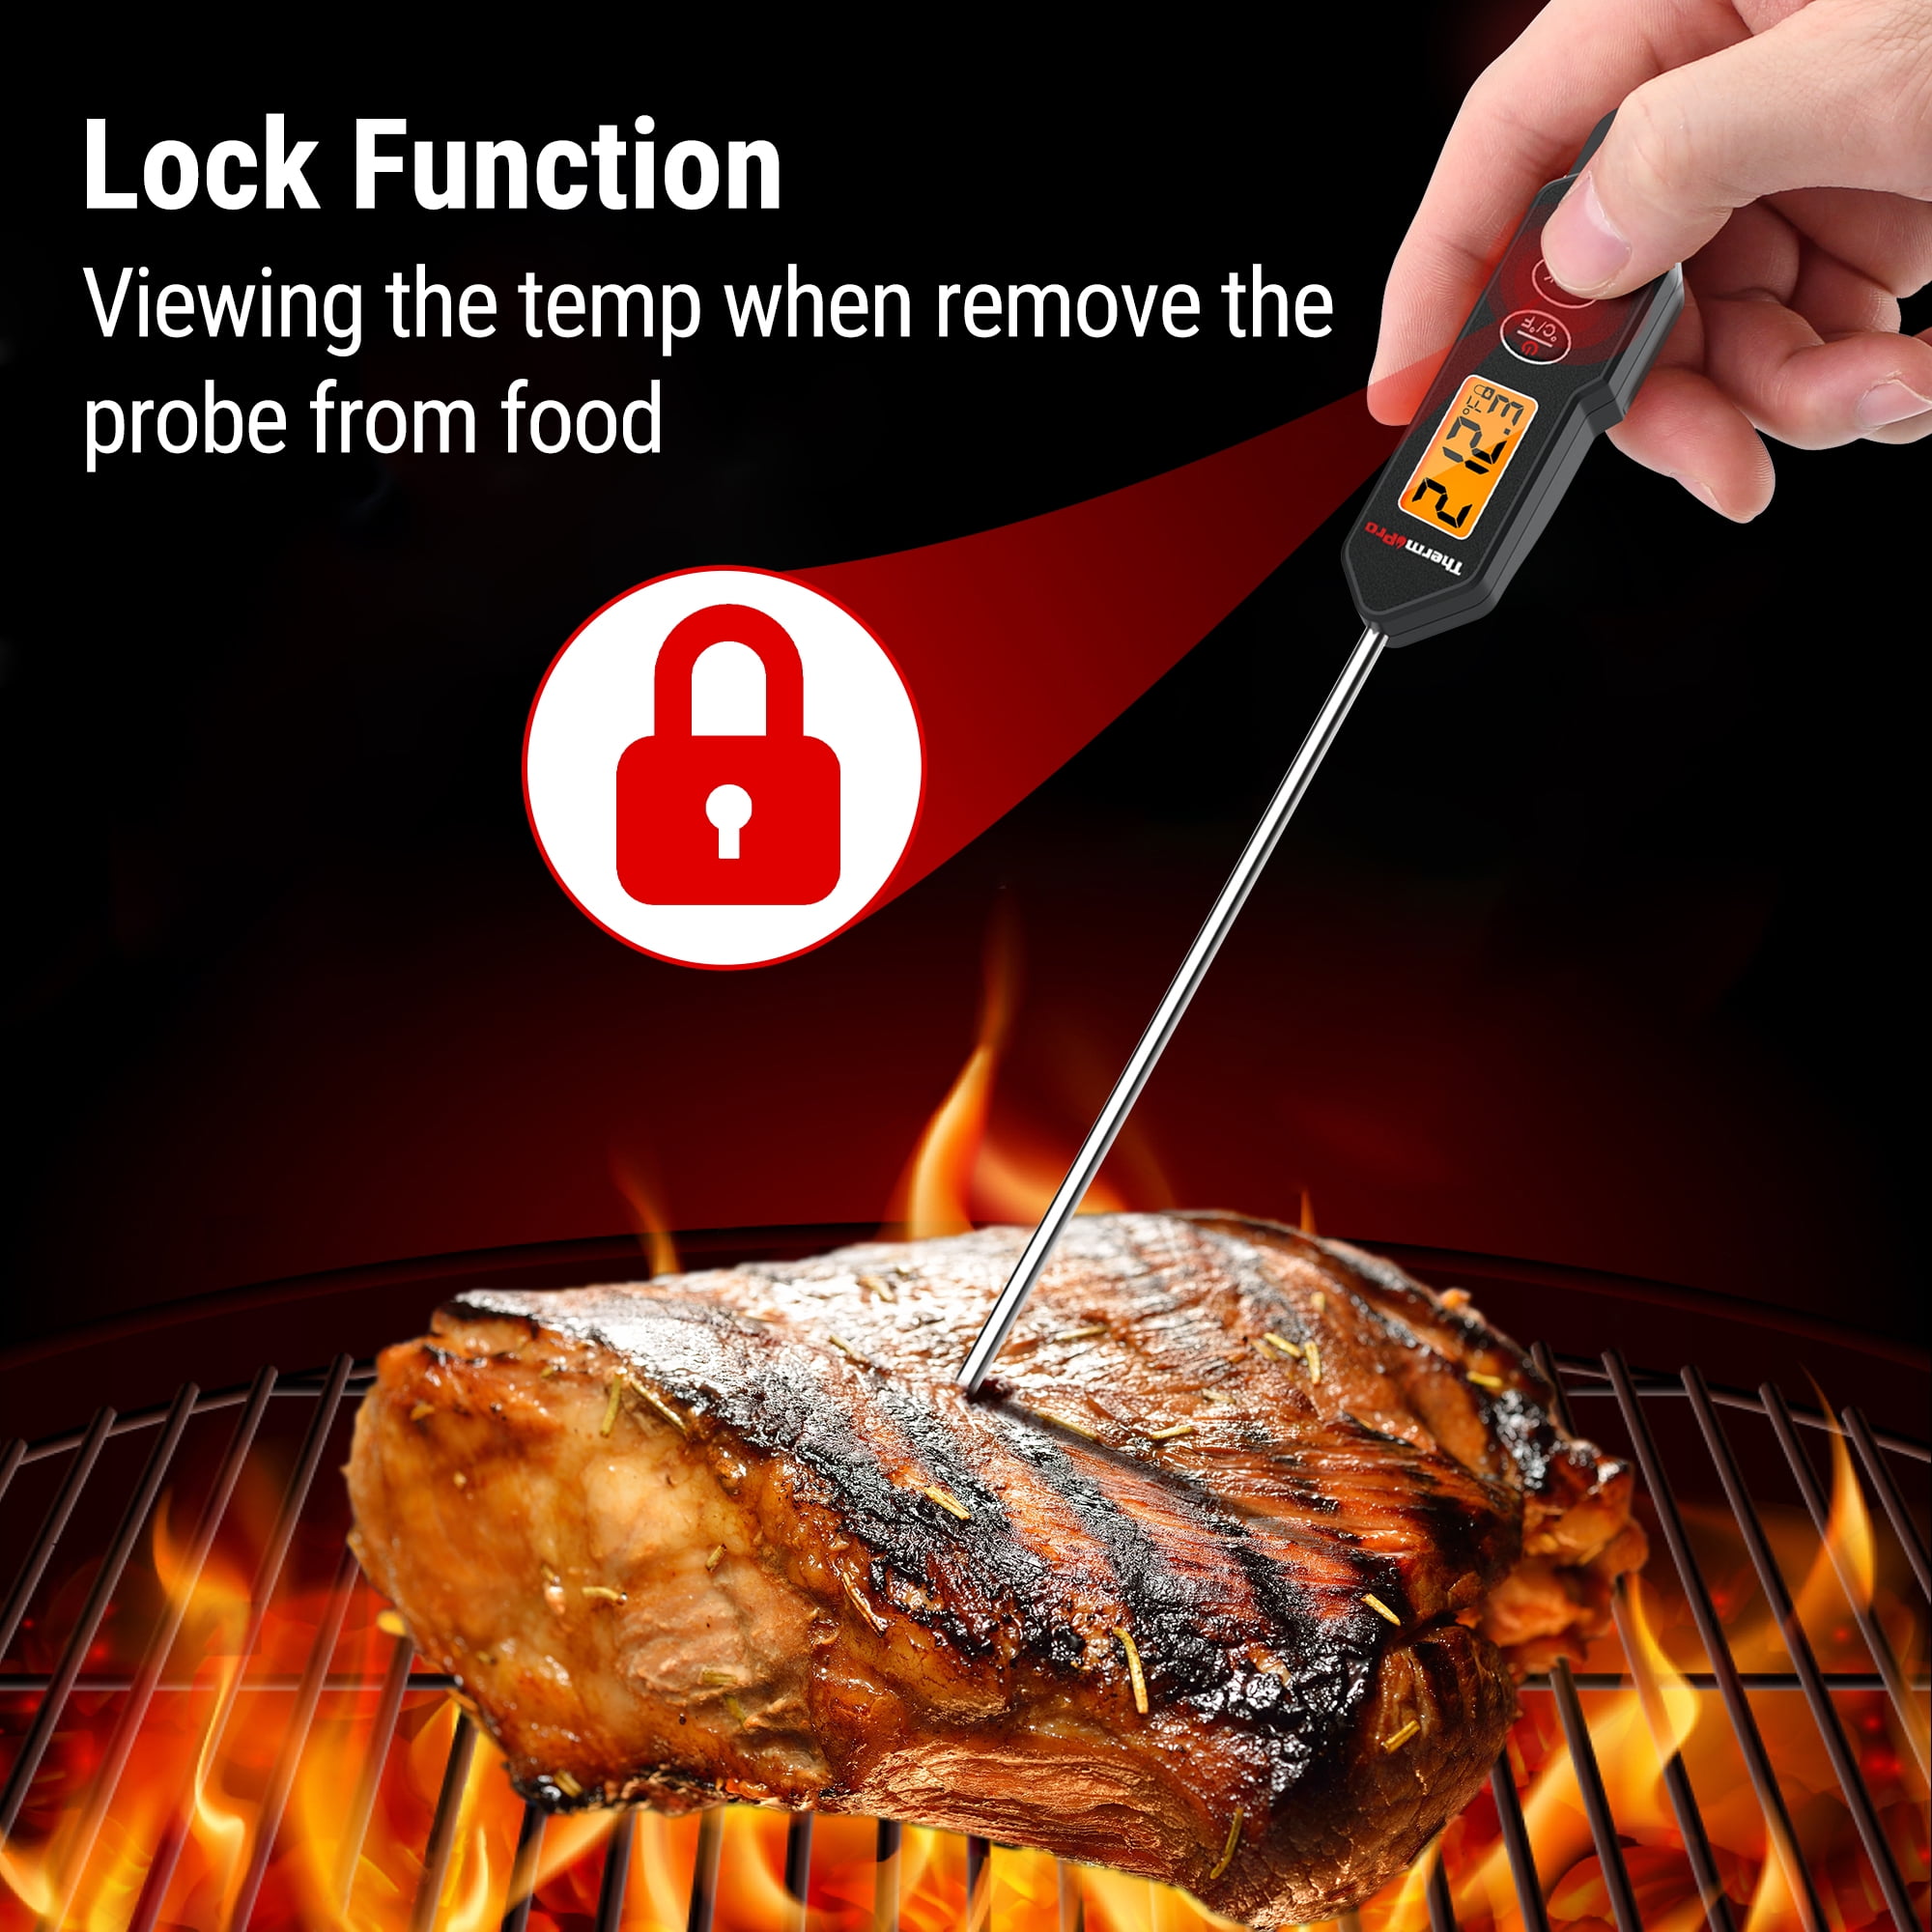 TP01H Digital Instant Read Meat Thermometer for Grilling Cooking BBQing  Smoking and Oven with Backlight